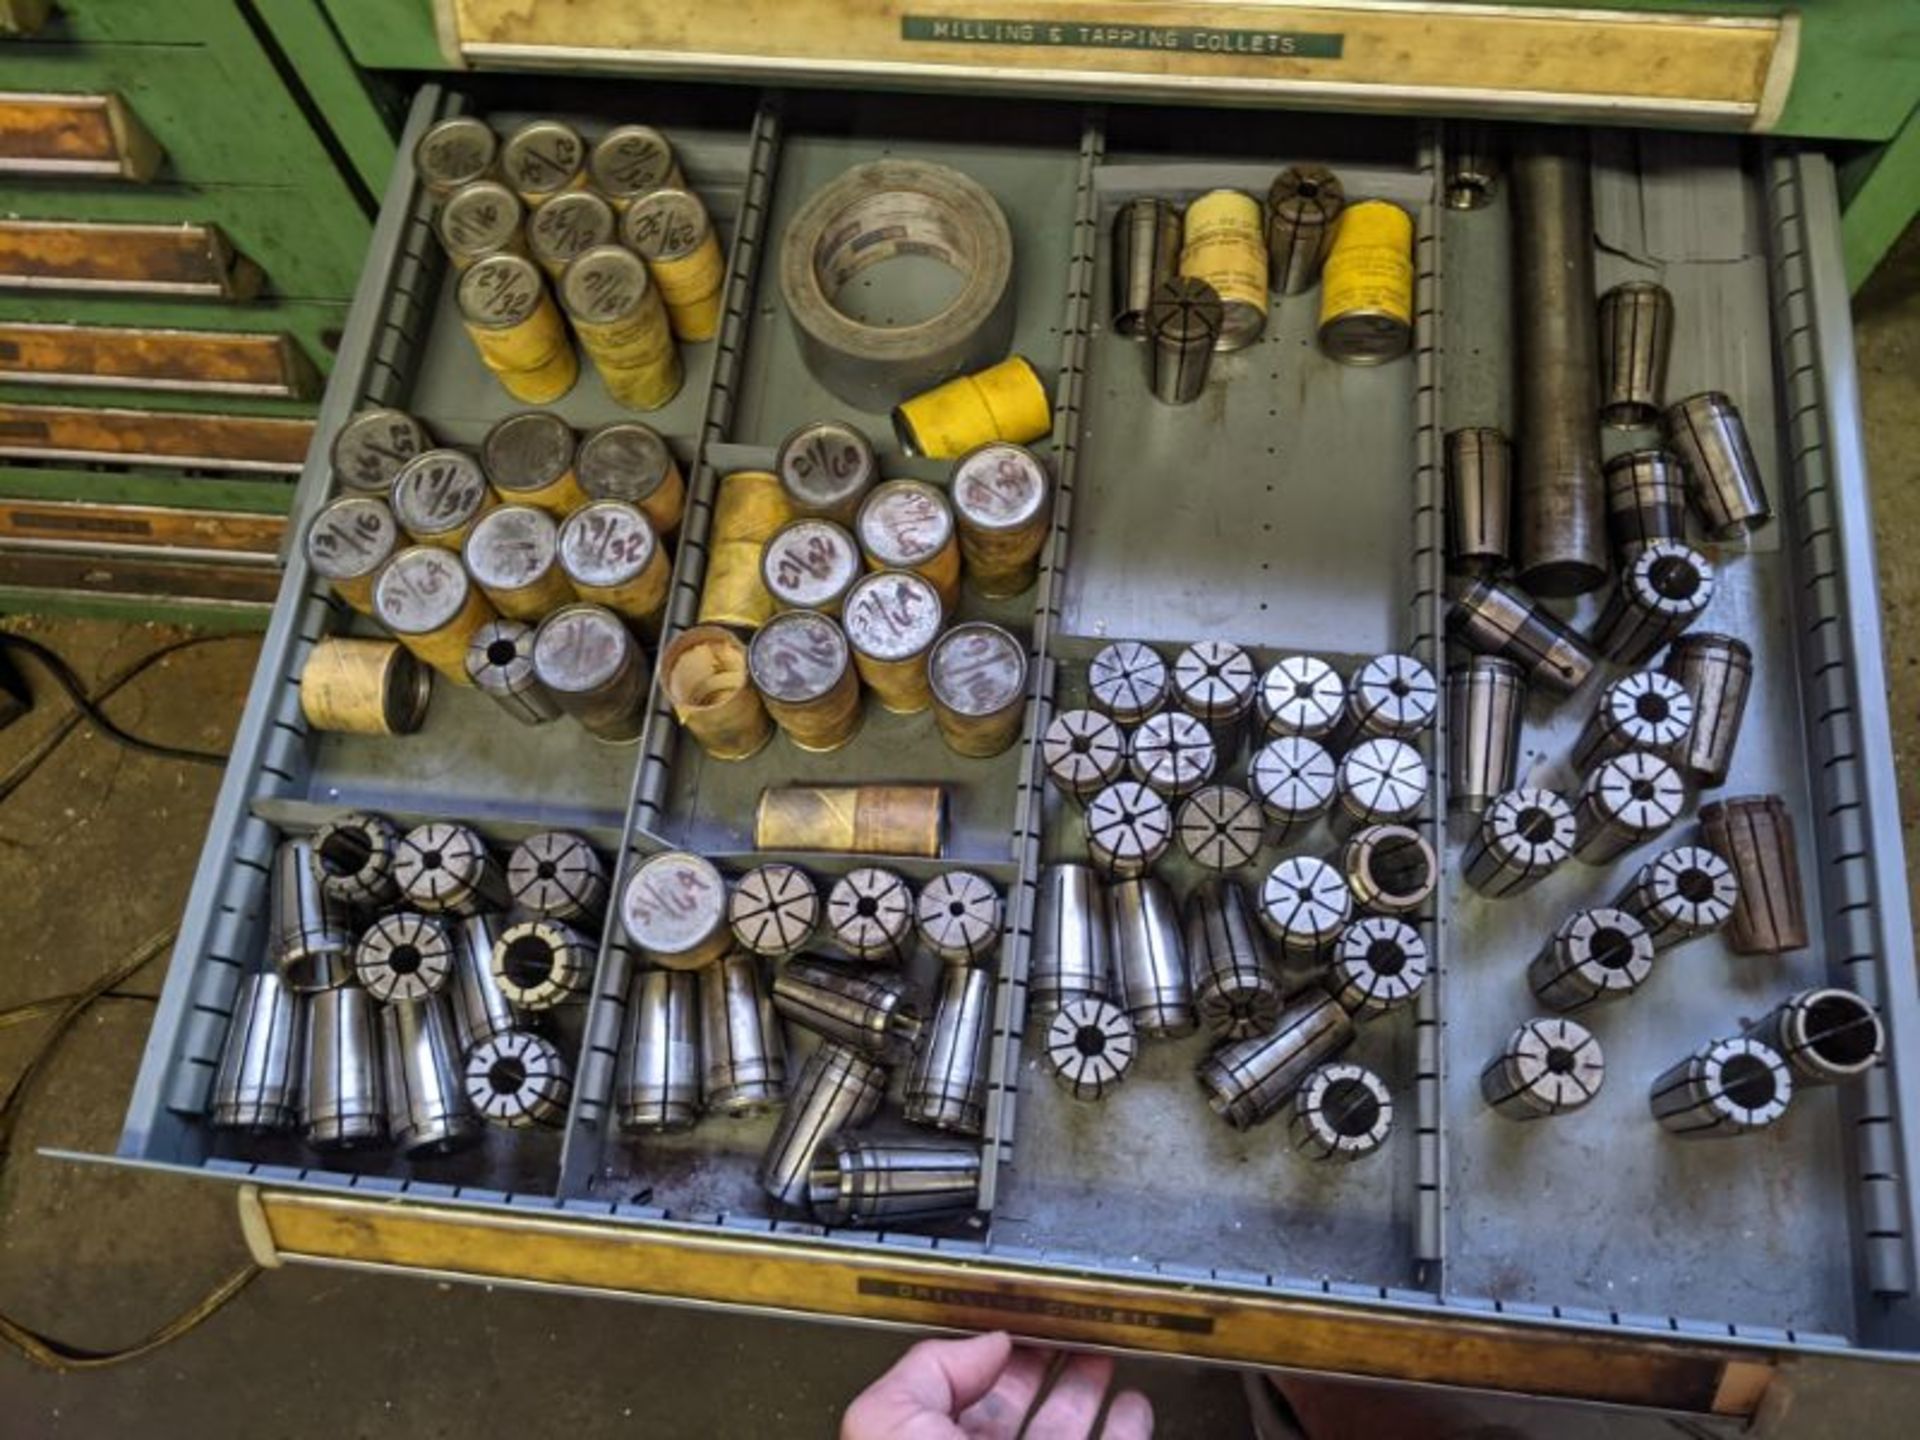 Vidmar Cabinet With Contents Endmills, Drills, Wrenches, Collets, Studs, Toolsetter - Image 6 of 7